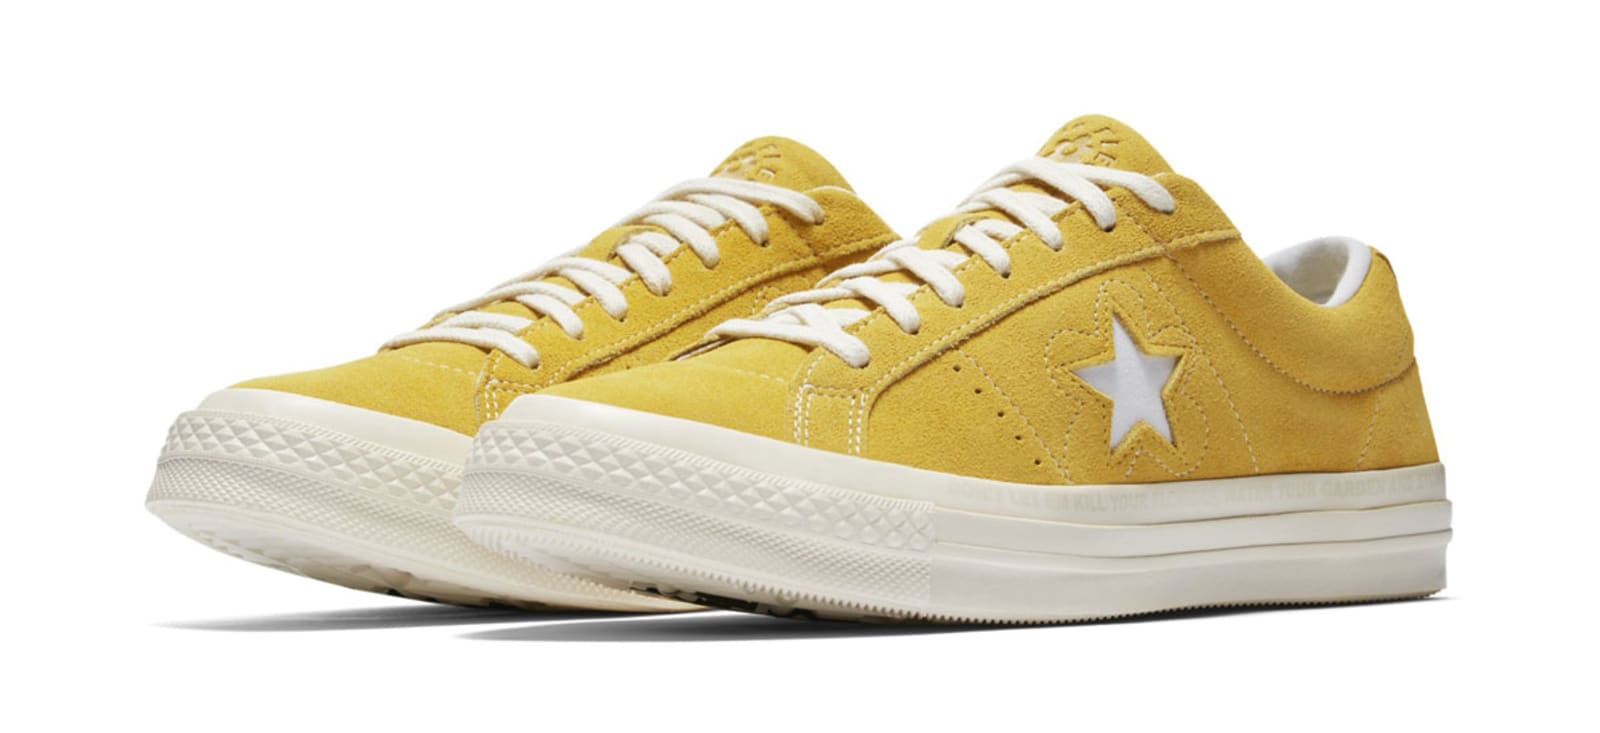 converse one star tyler the creator release date